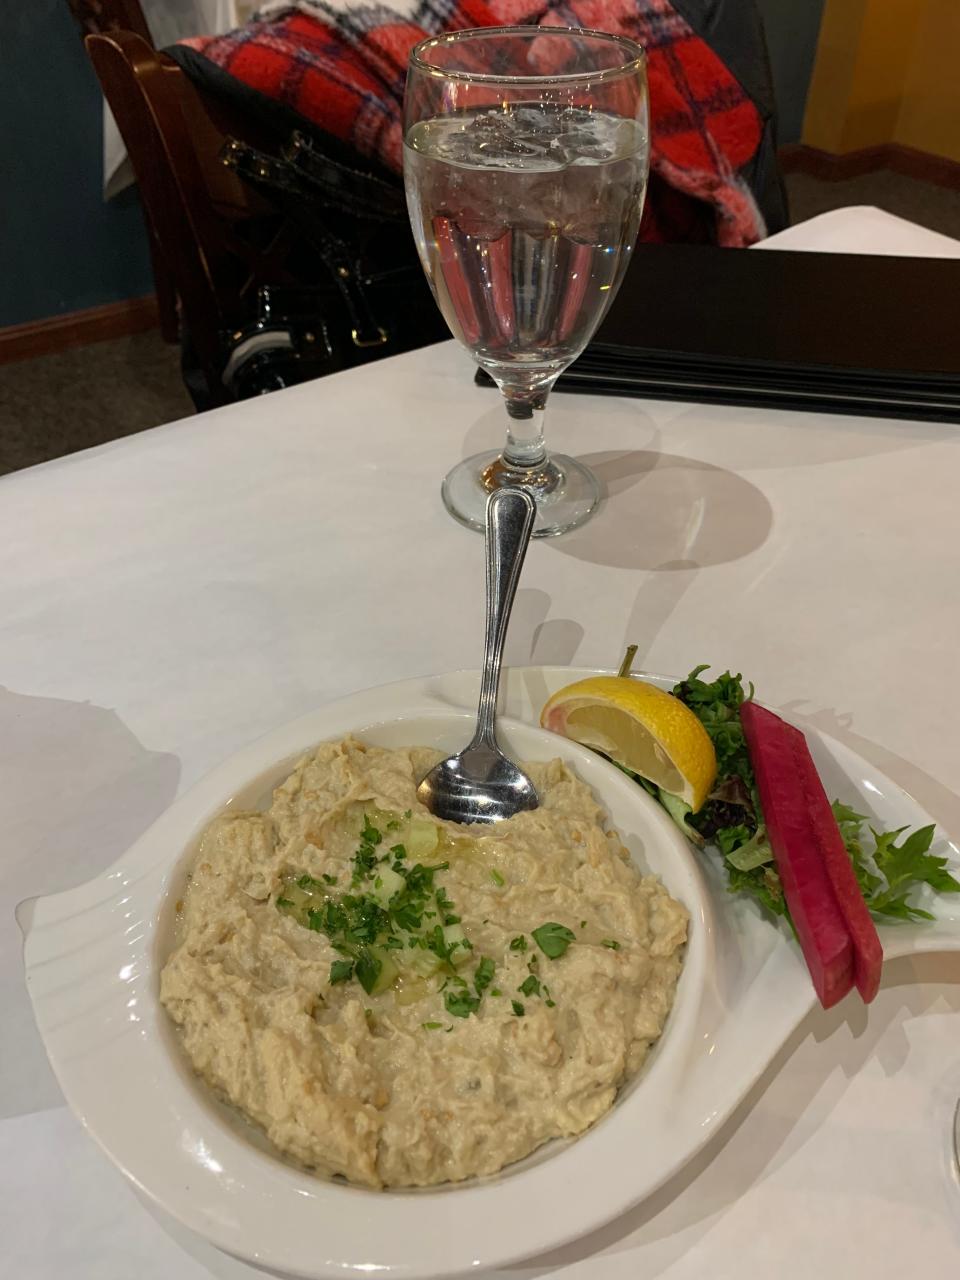 Baba ghanoush comes with pita bread and grilled naan can be added at Laziza in Kent.